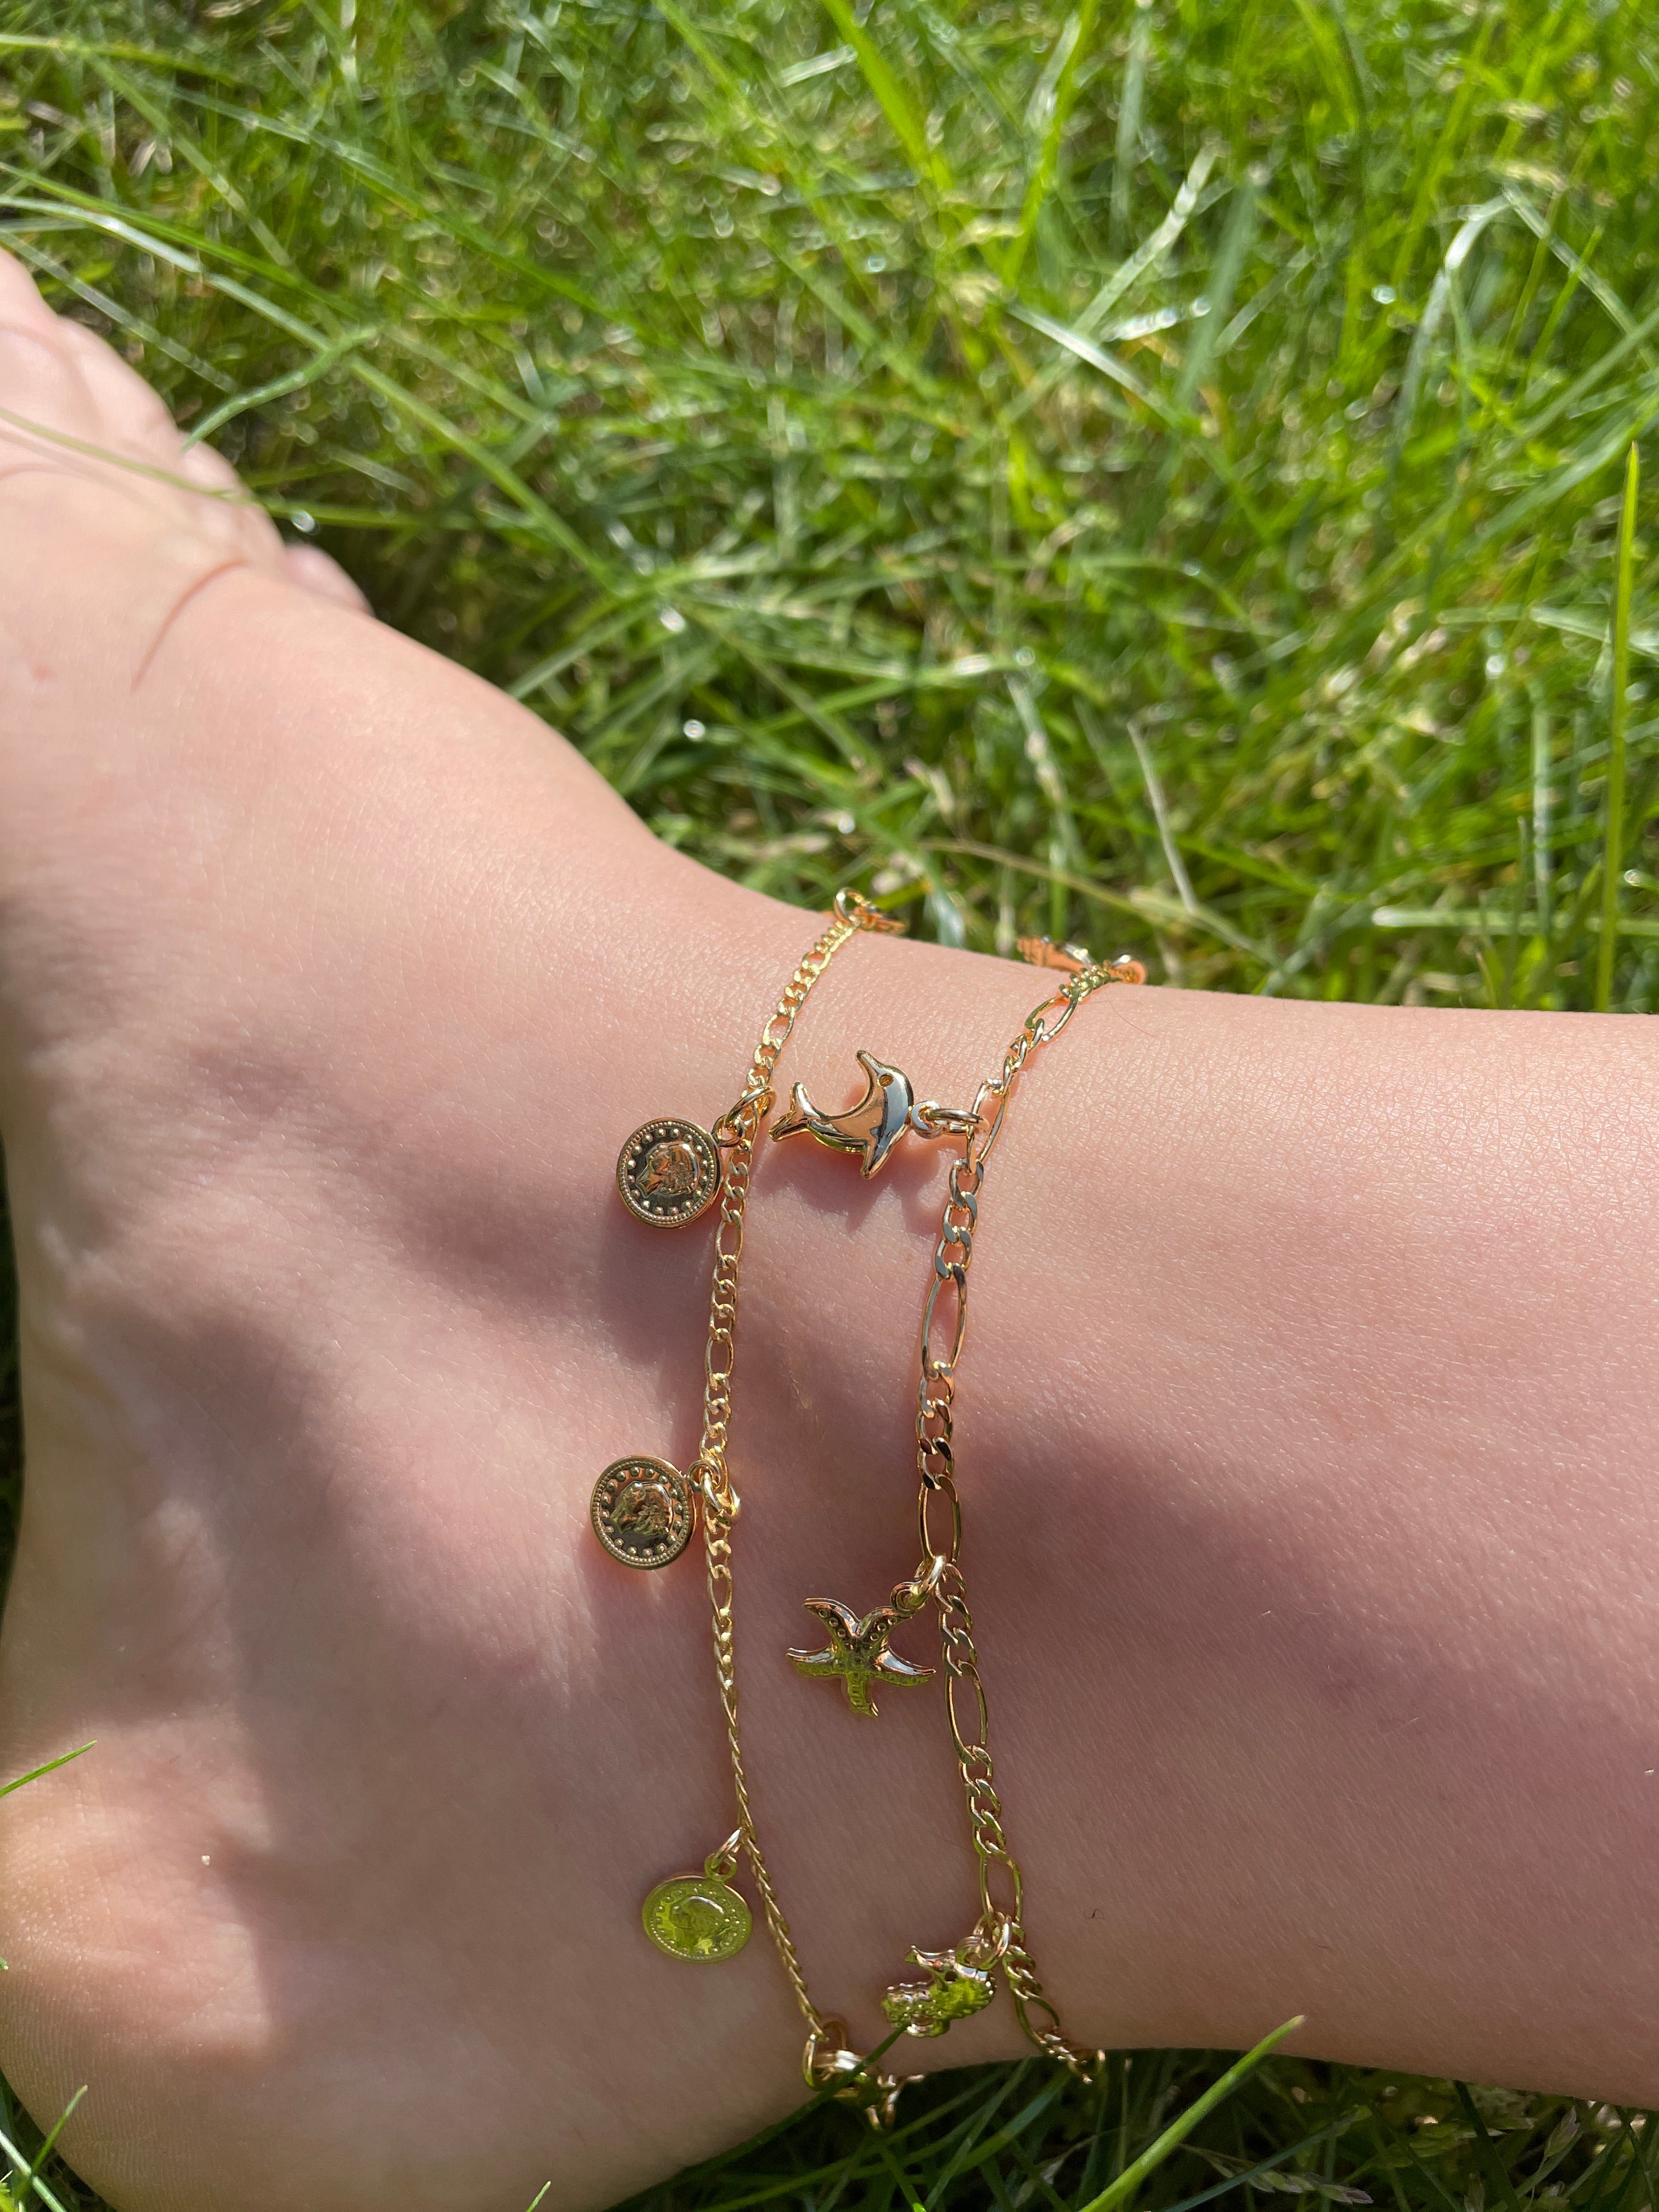 Paradise anklets